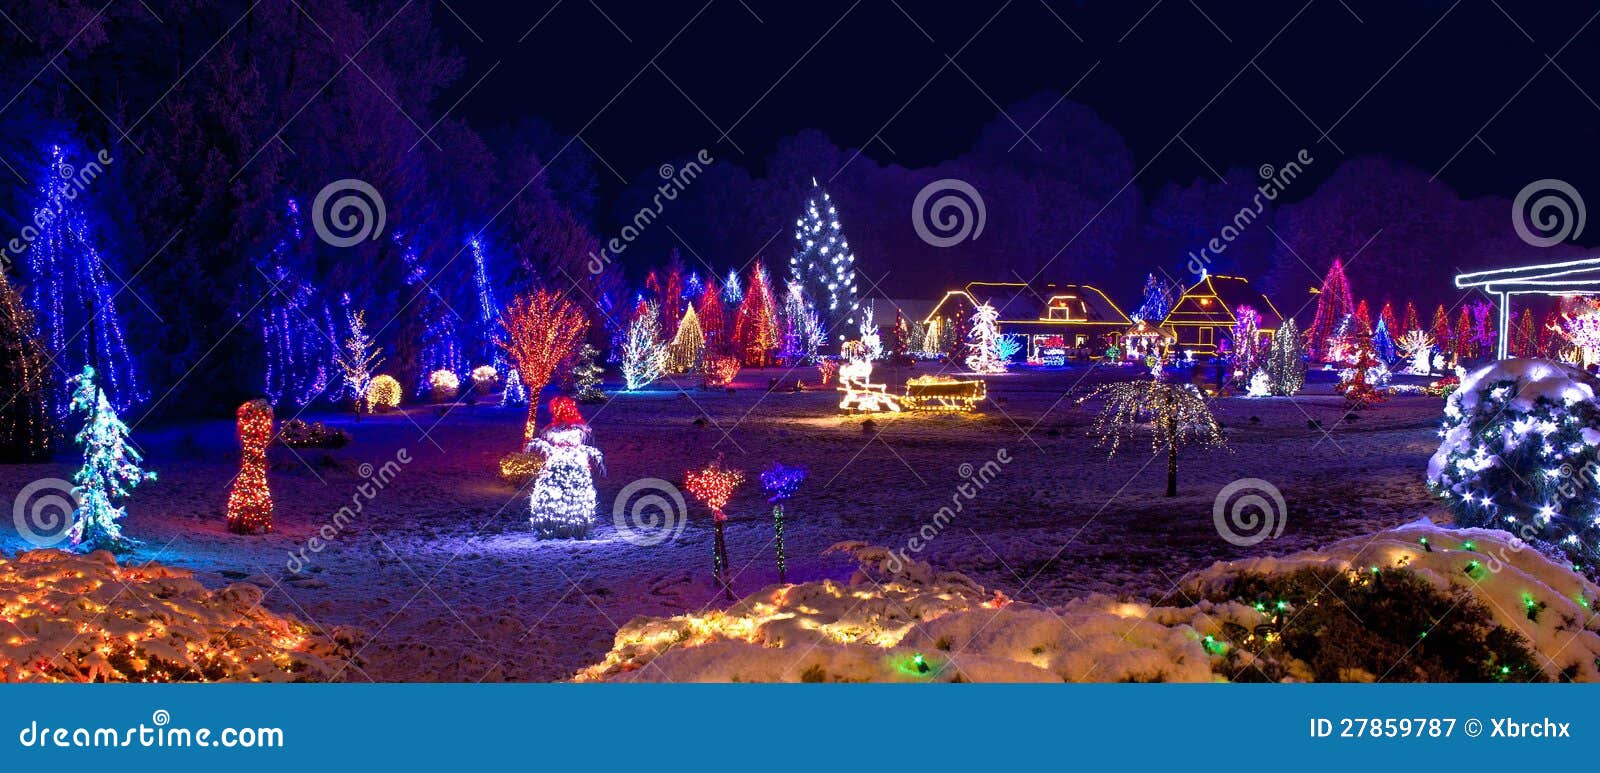 village in christmas lights, panoramic view